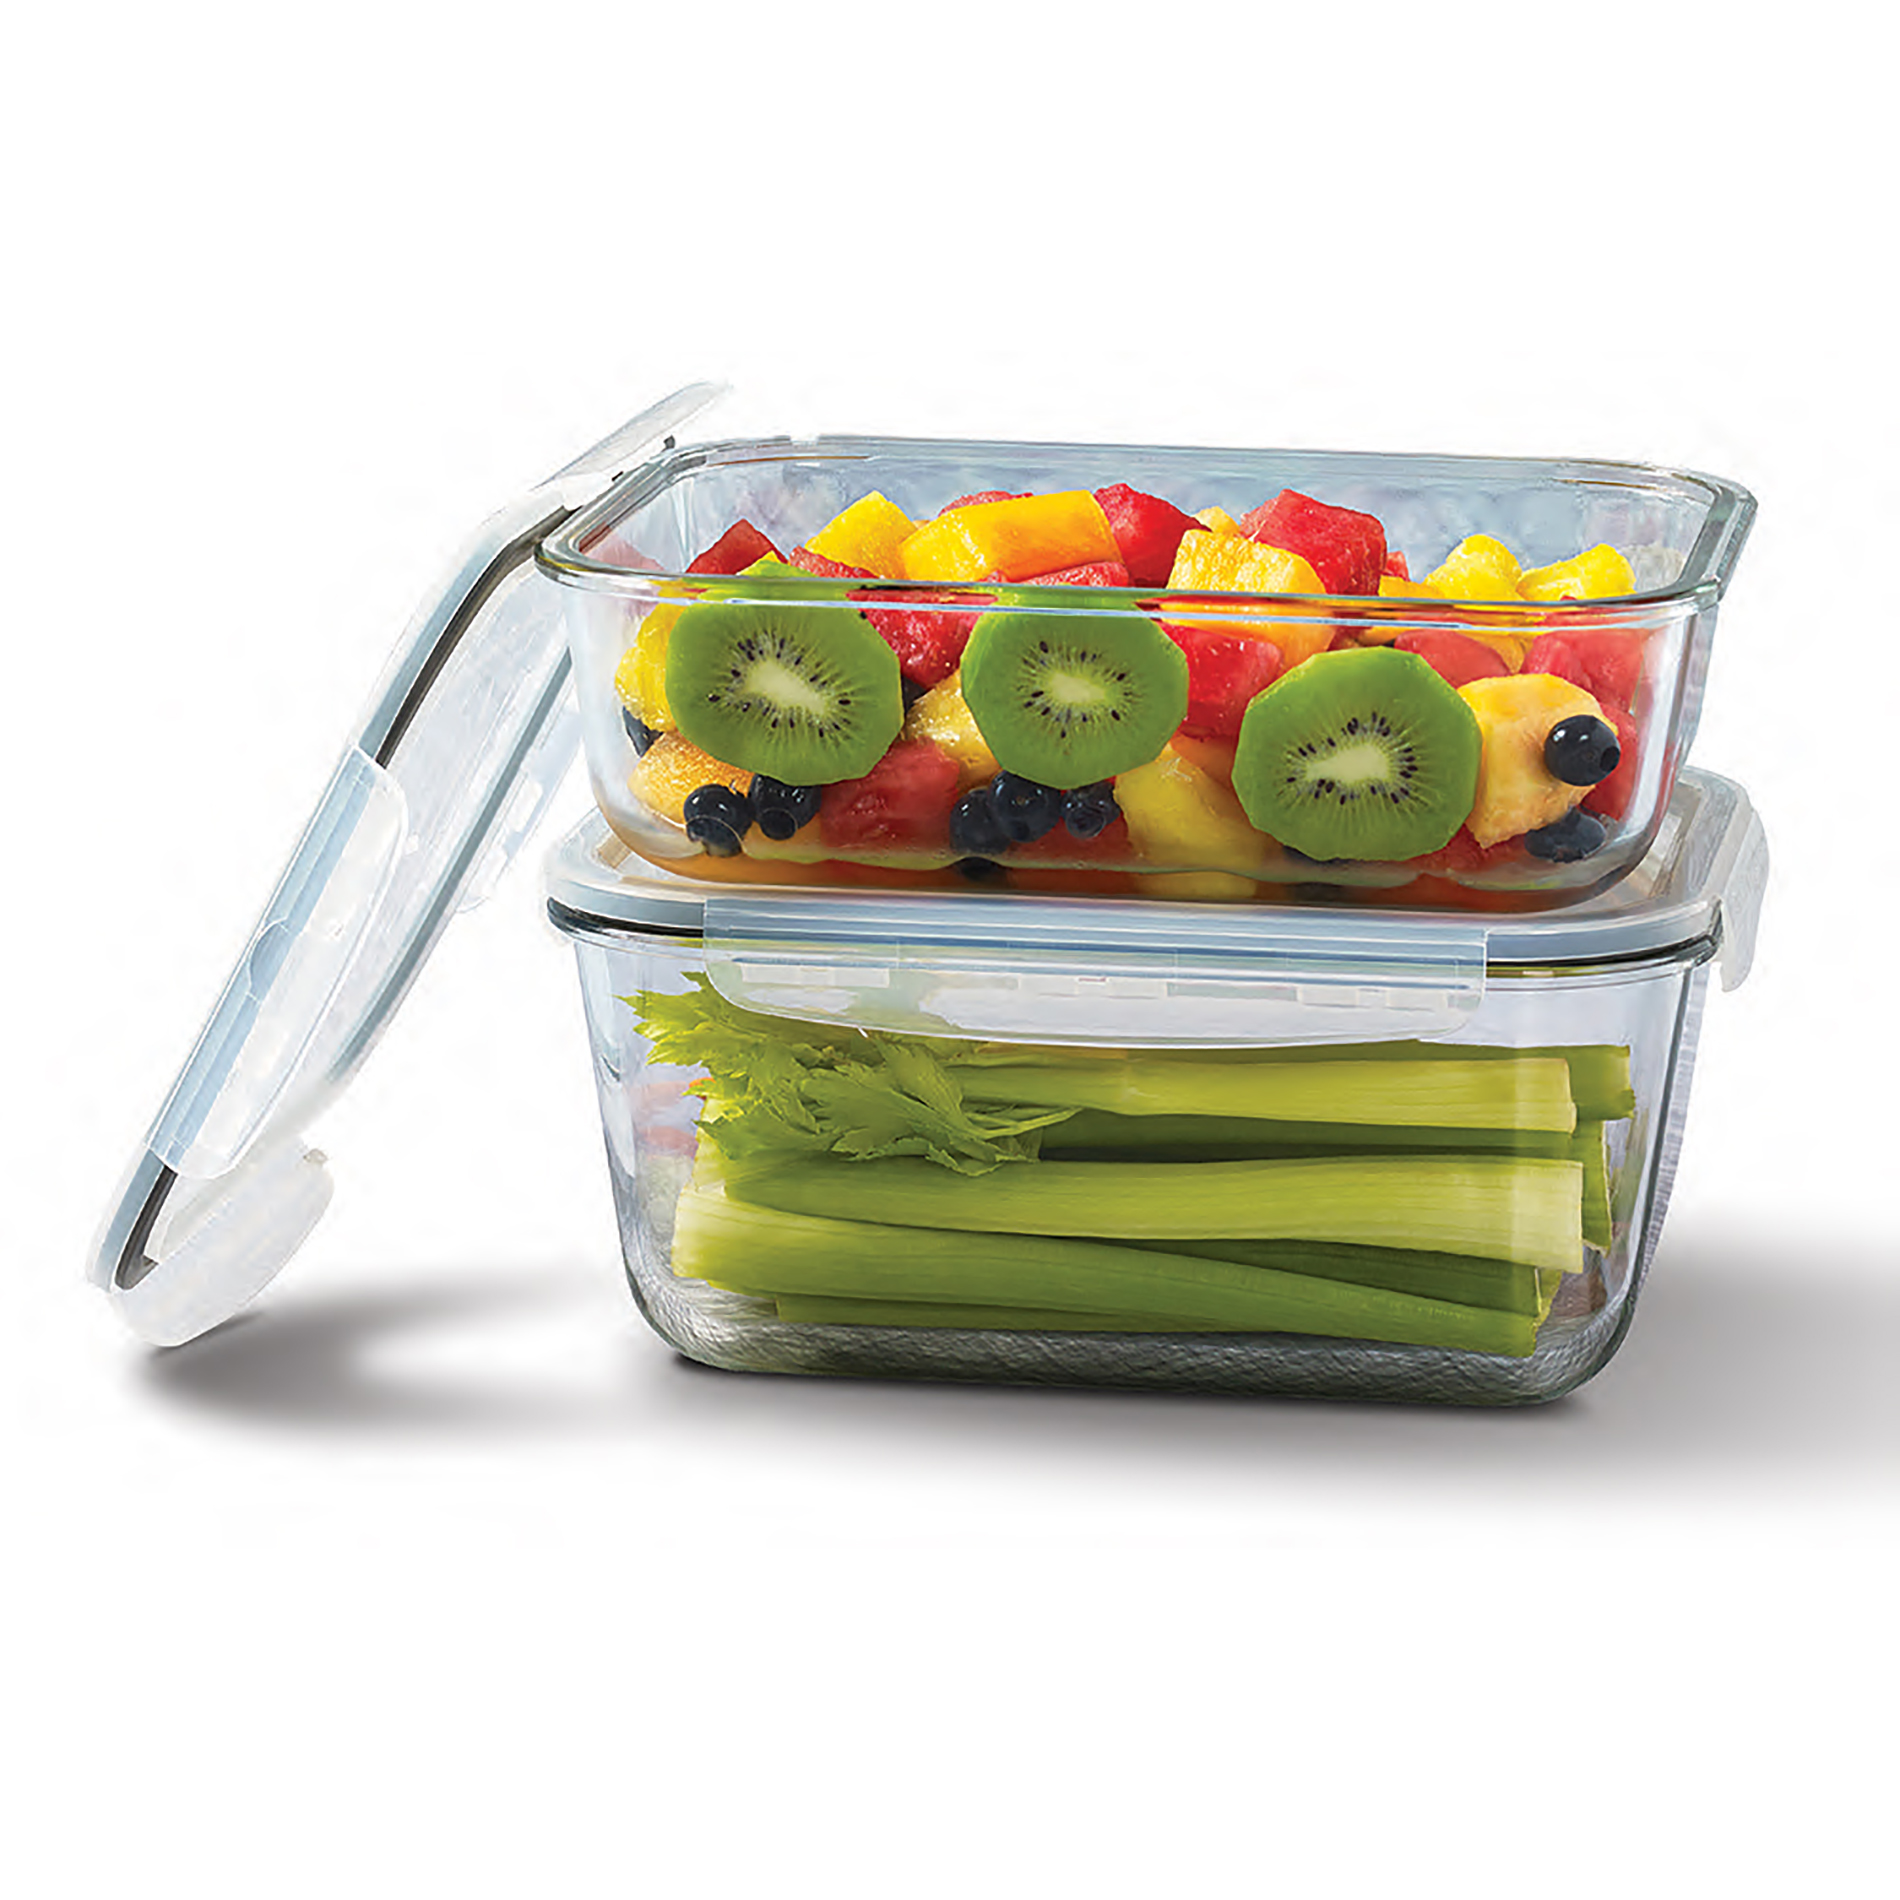 Tabletops Unlimited, Inc 4pc. Glass Storage Container Set